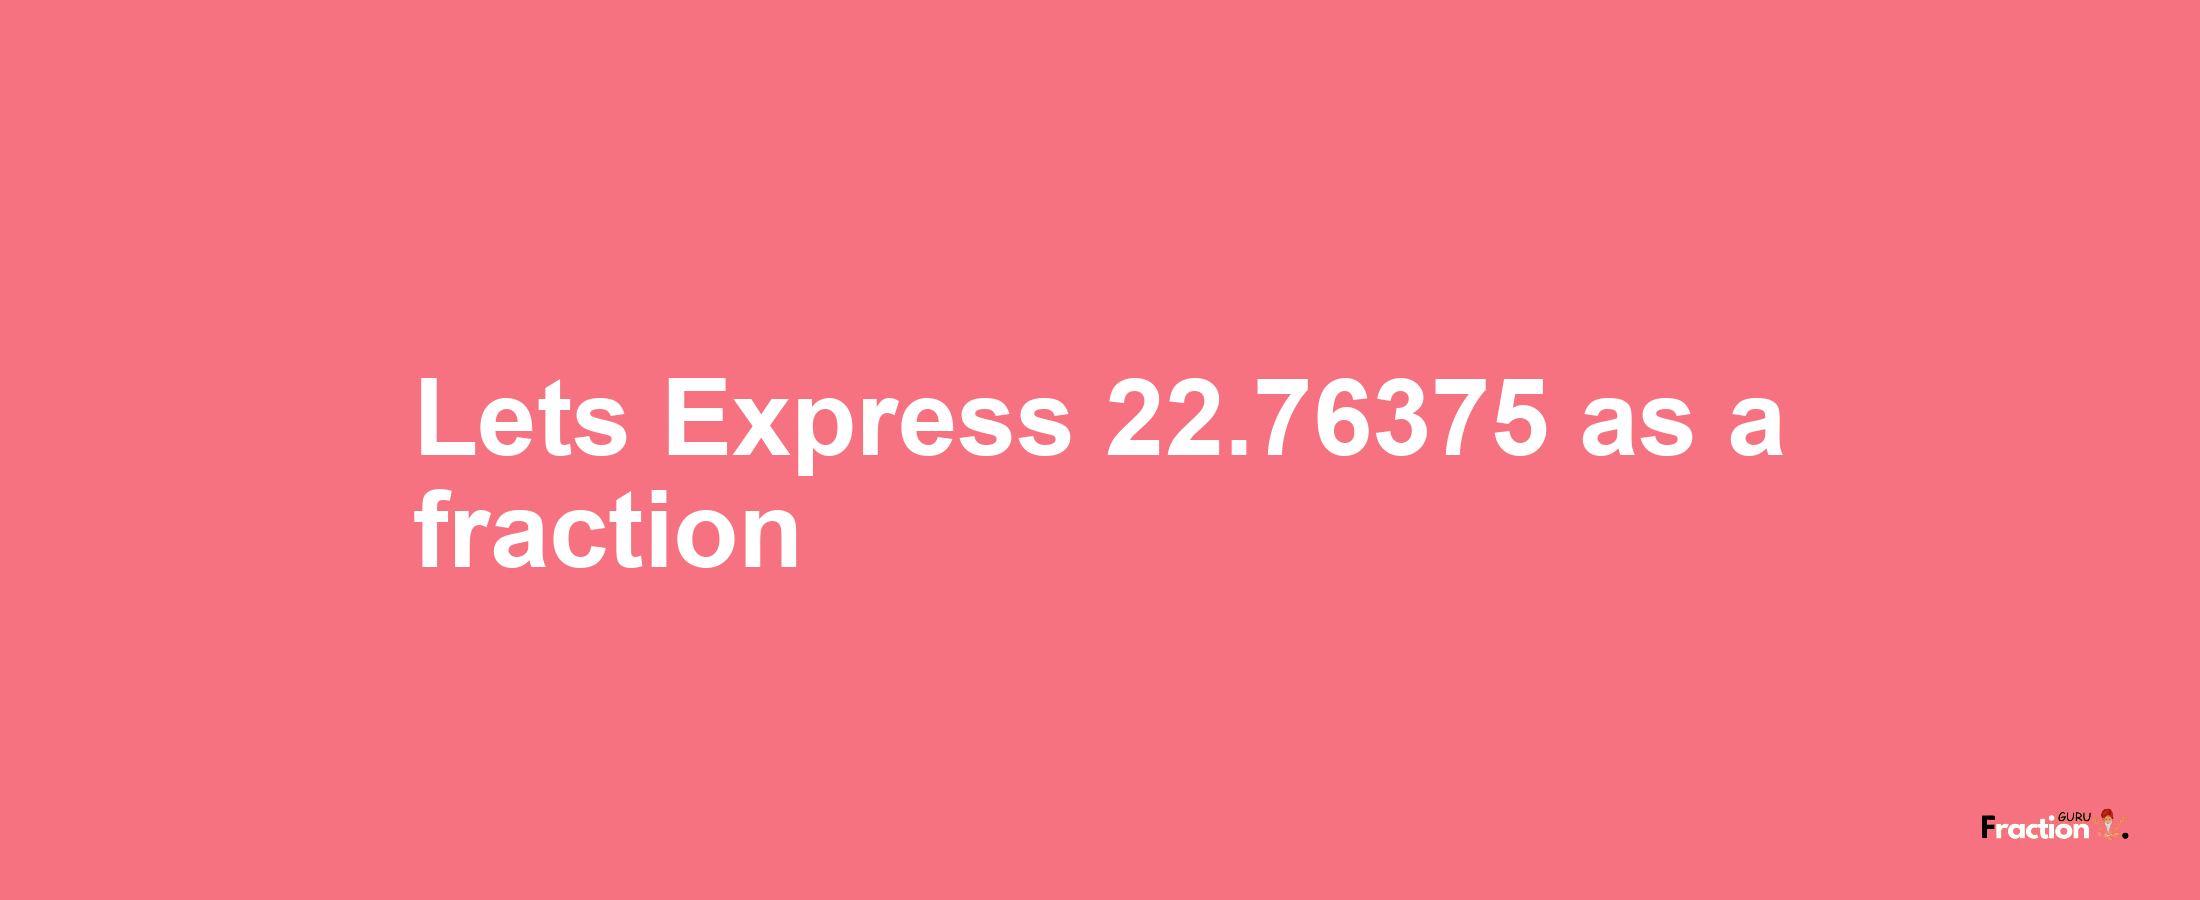 Lets Express 22.76375 as afraction